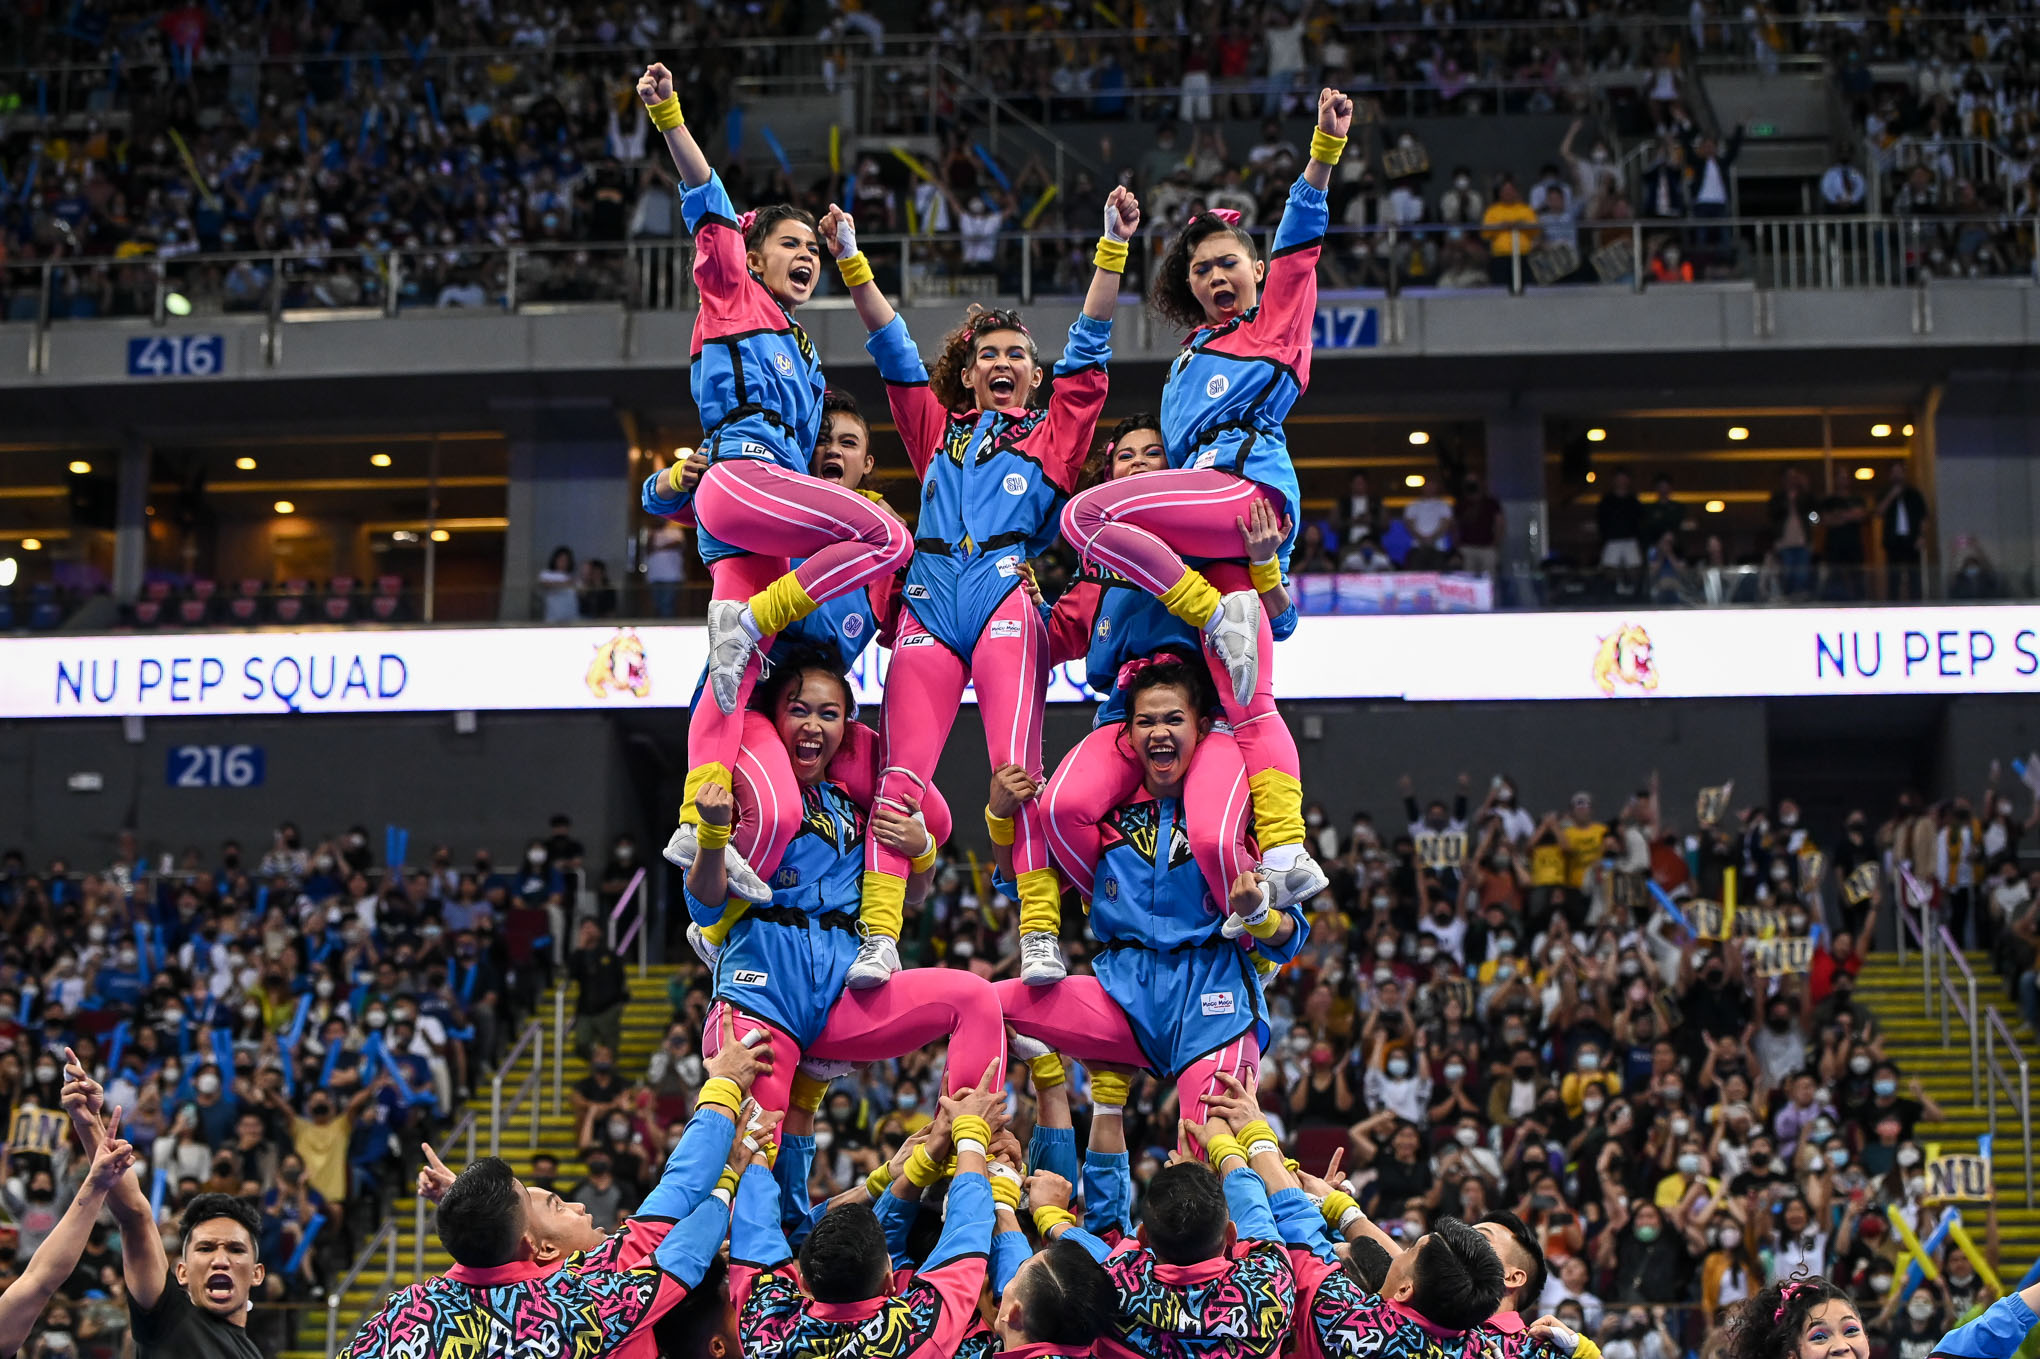 NU Pep Squad in the UAAP Season 85 cheerdance competition. UAAP PHOTO